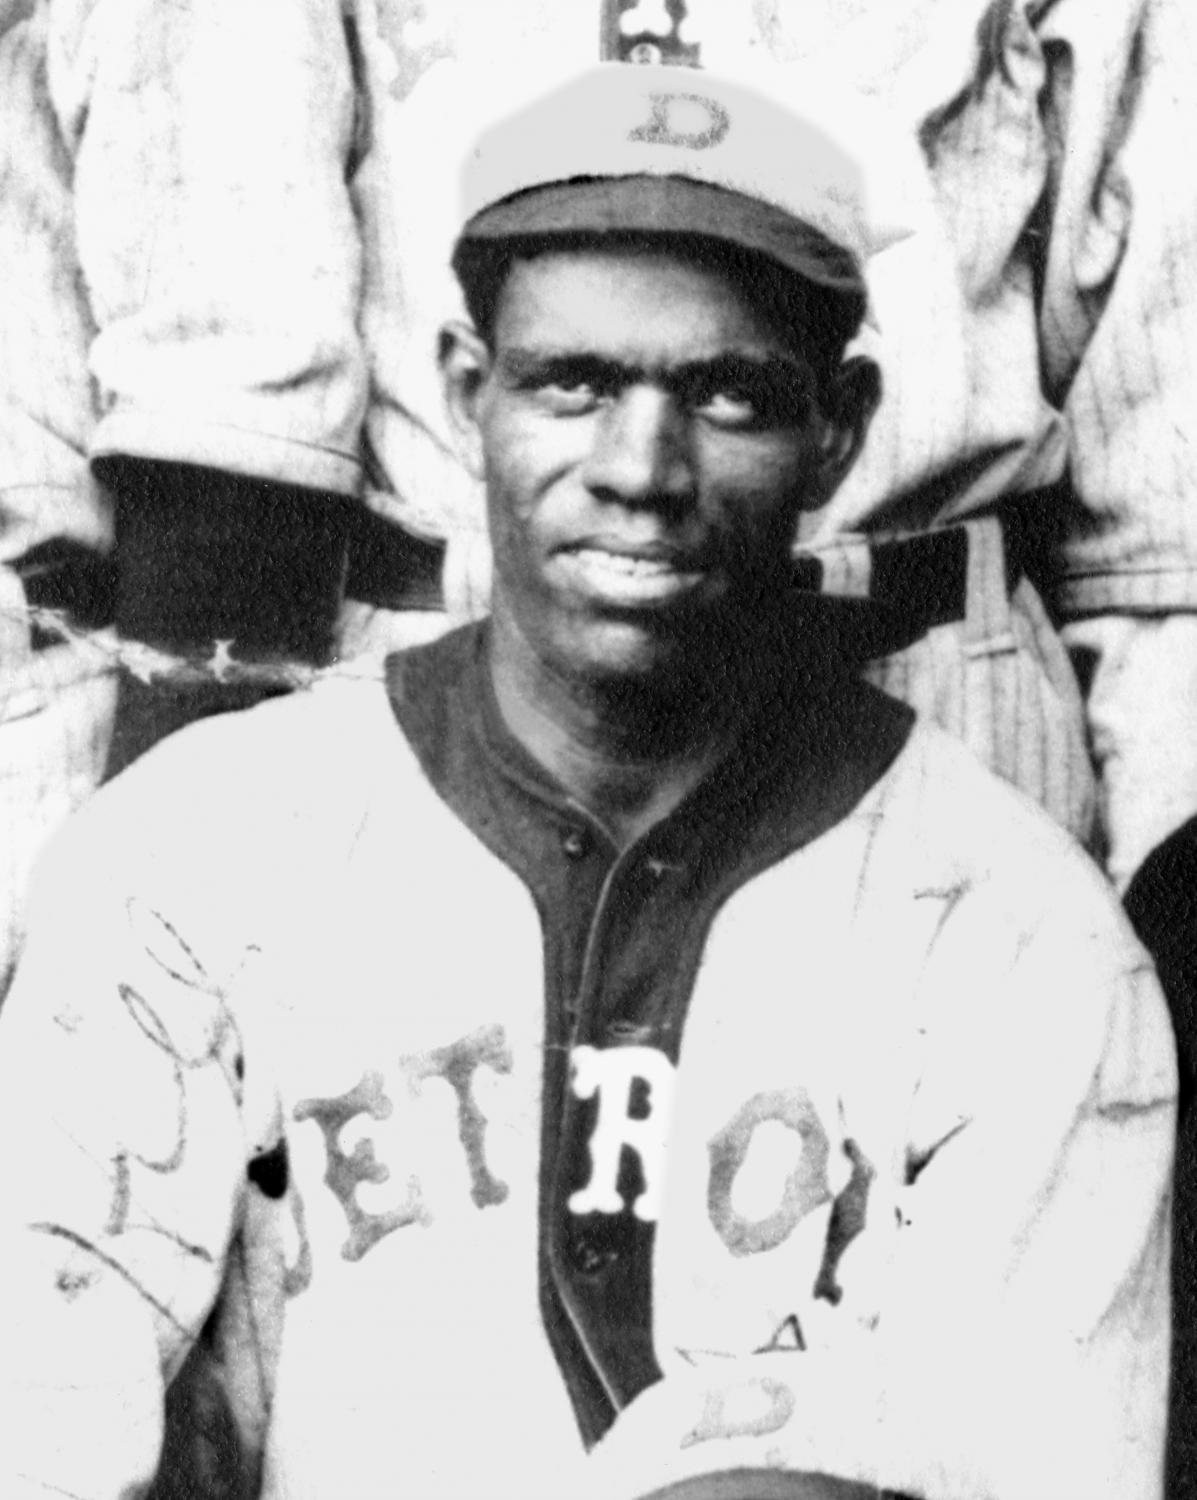 Pete Hill (NATIONAL BASEBALL HALL OF FAME LIBRARY)